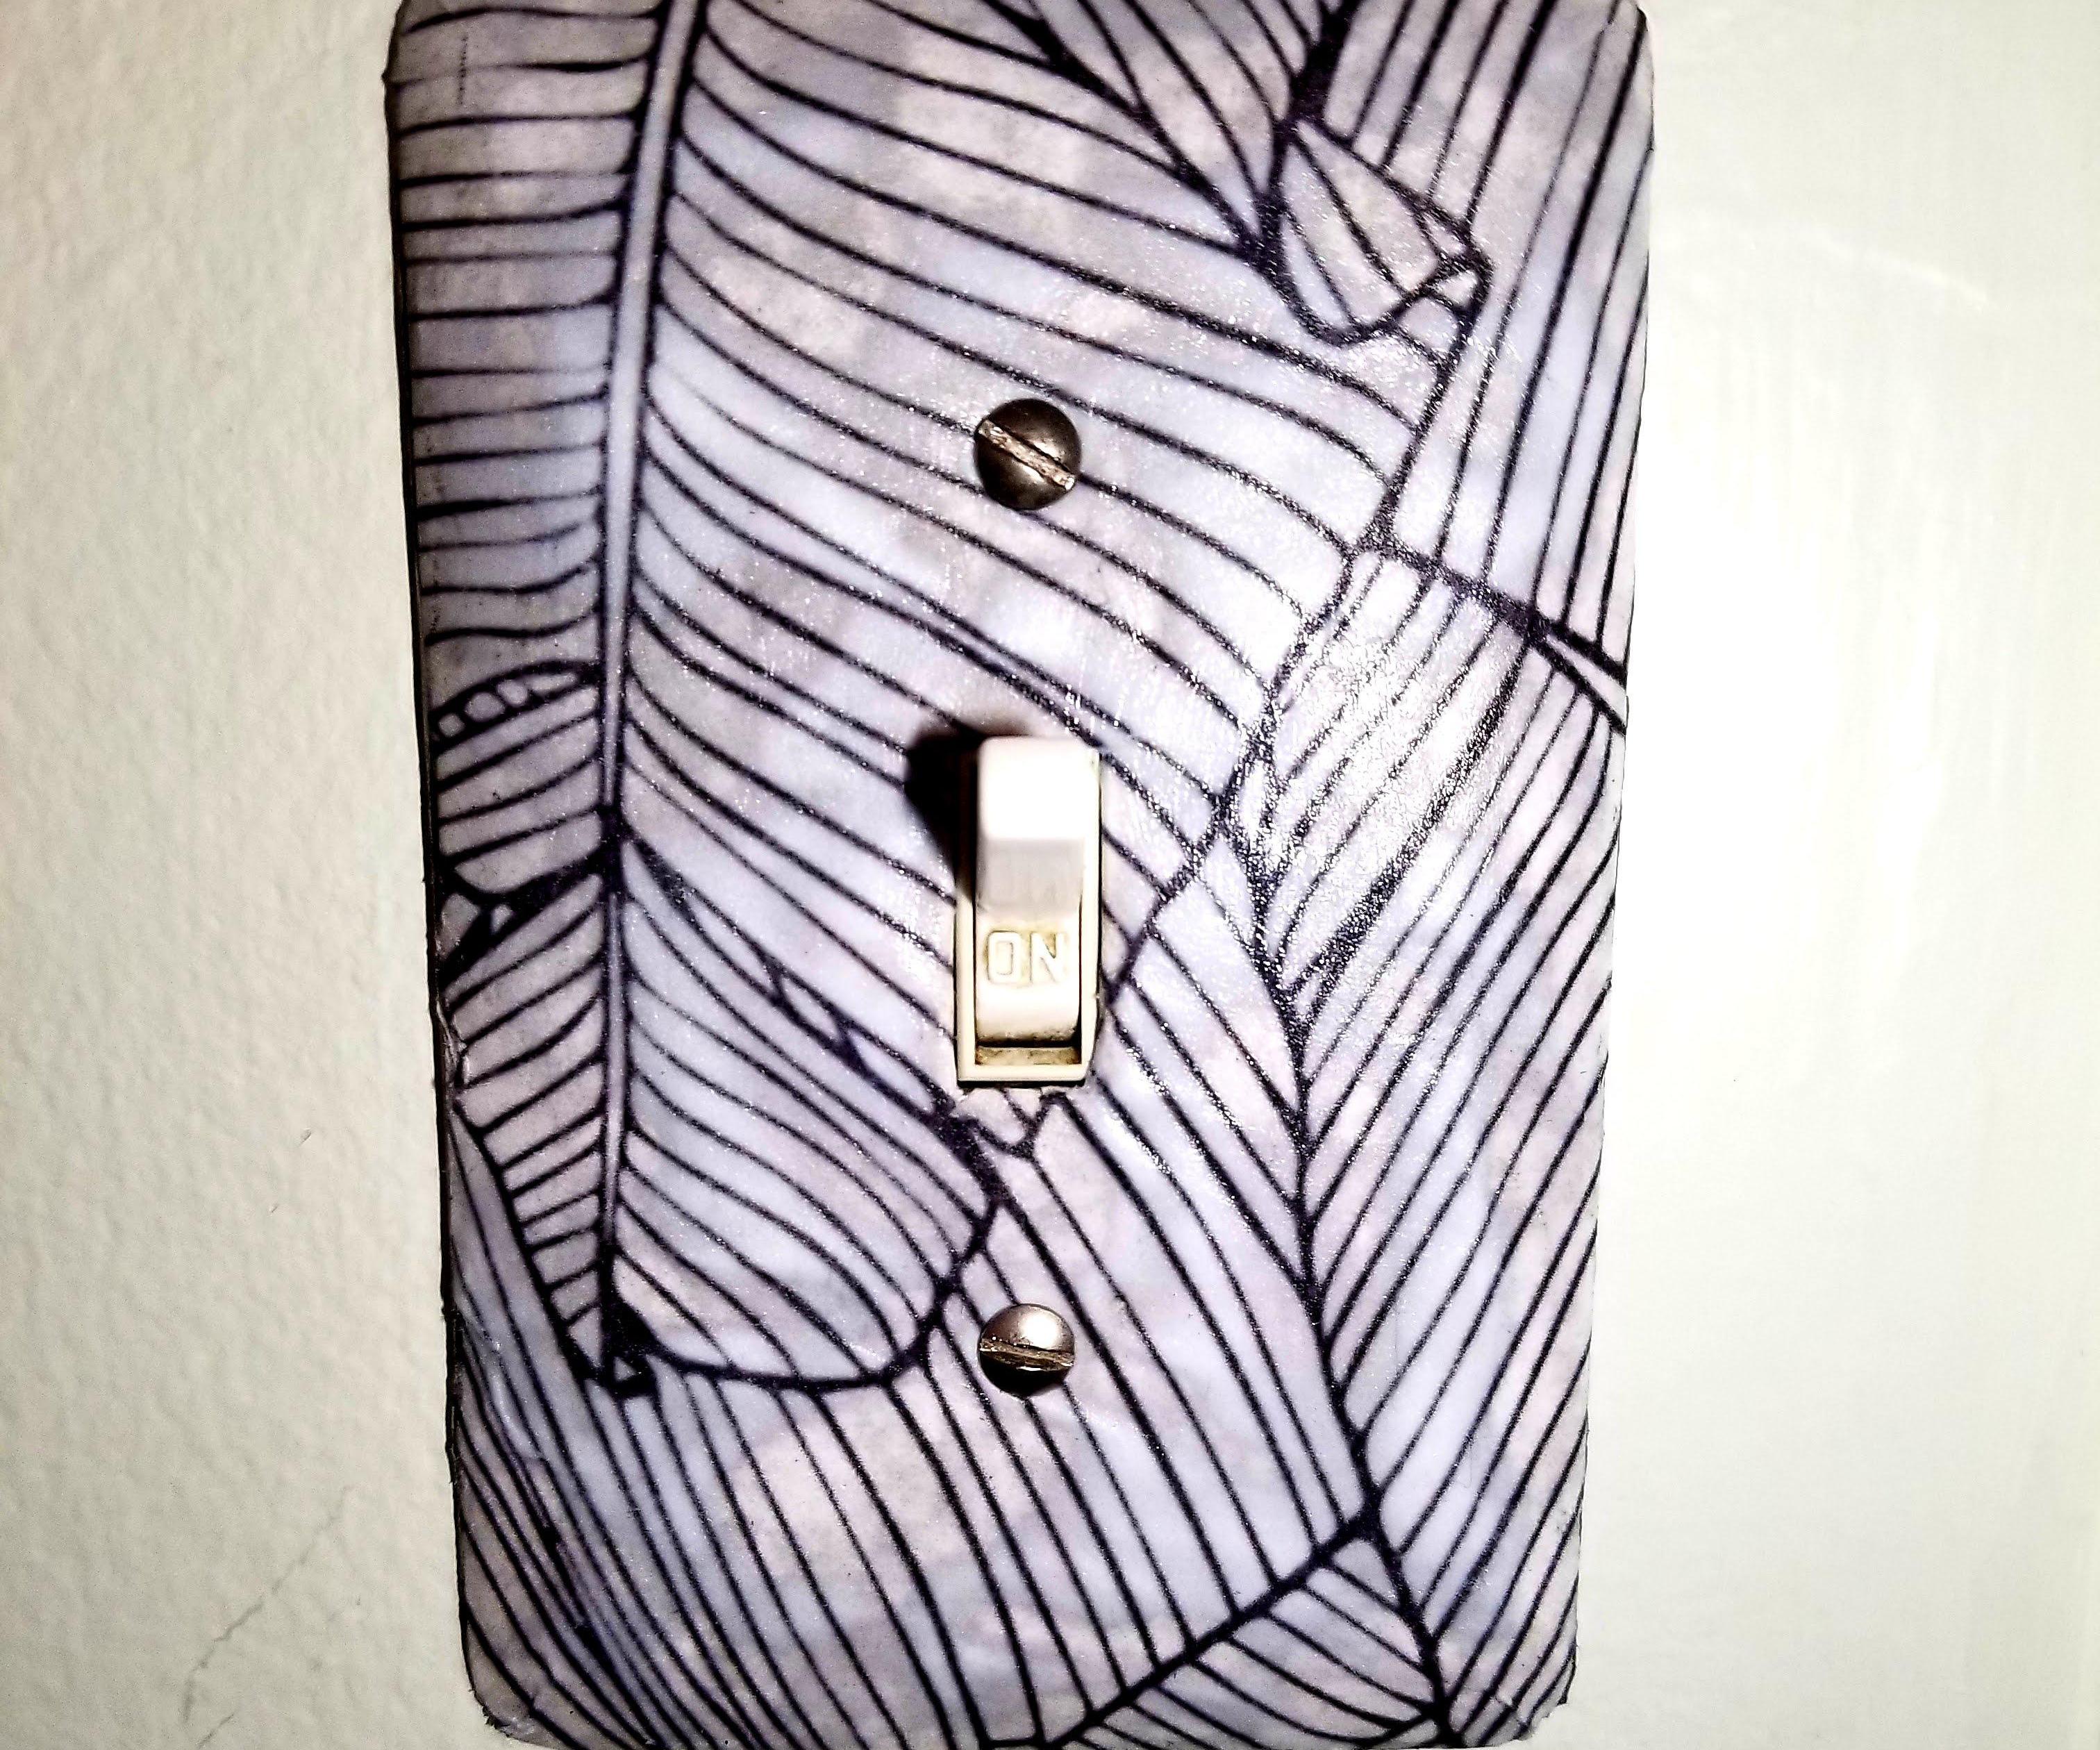 Patterned Light Switch (All Paper and Glue!)